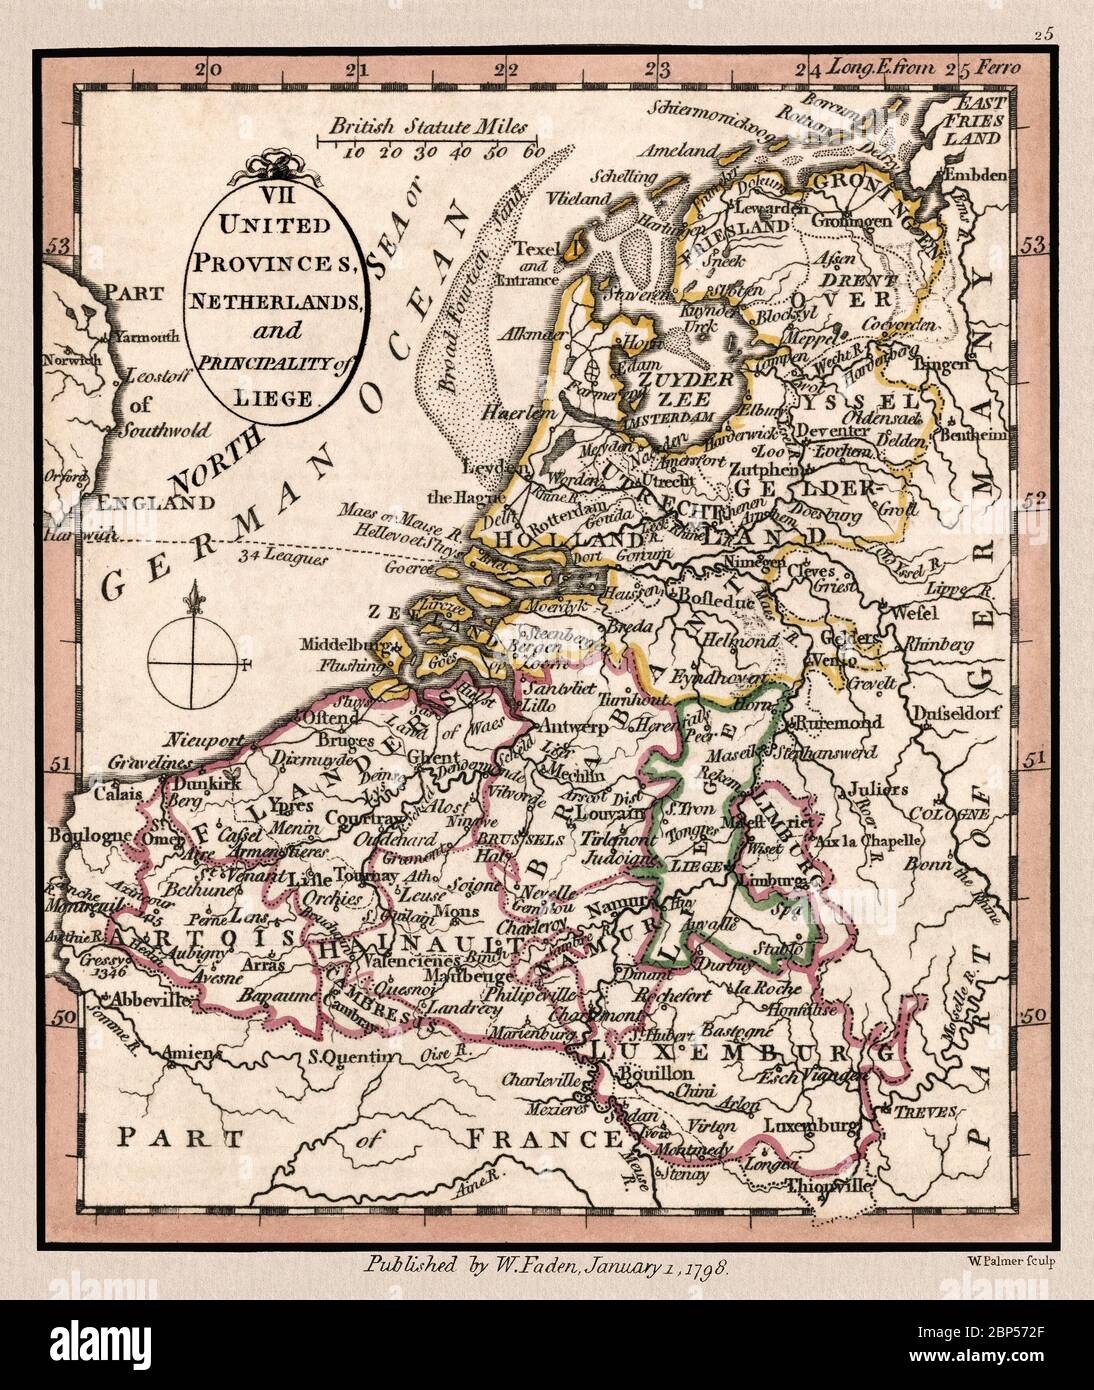 'United Provinces, Netherlands, and Principality of Liege.' Map shows geographic divisions circa 1798, This is a beautifully detailed historic map reproduction. Original from a British atlas published by famed cartographer William Faden. Stock Photo